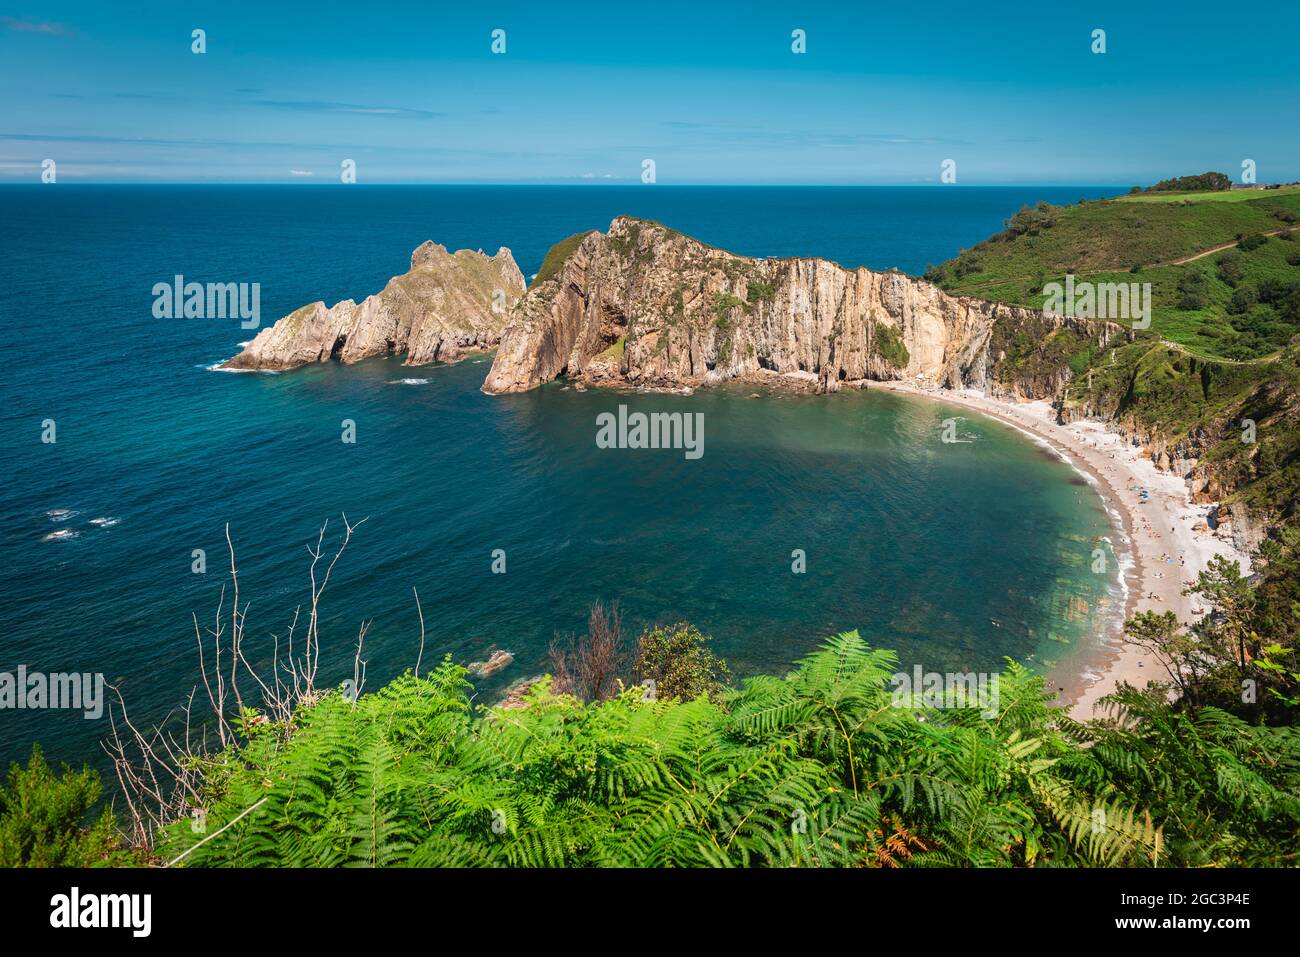 Cantabrian Sea, beach and cliffs of Spain's northern coast from the fern-covered edge Stock Photo